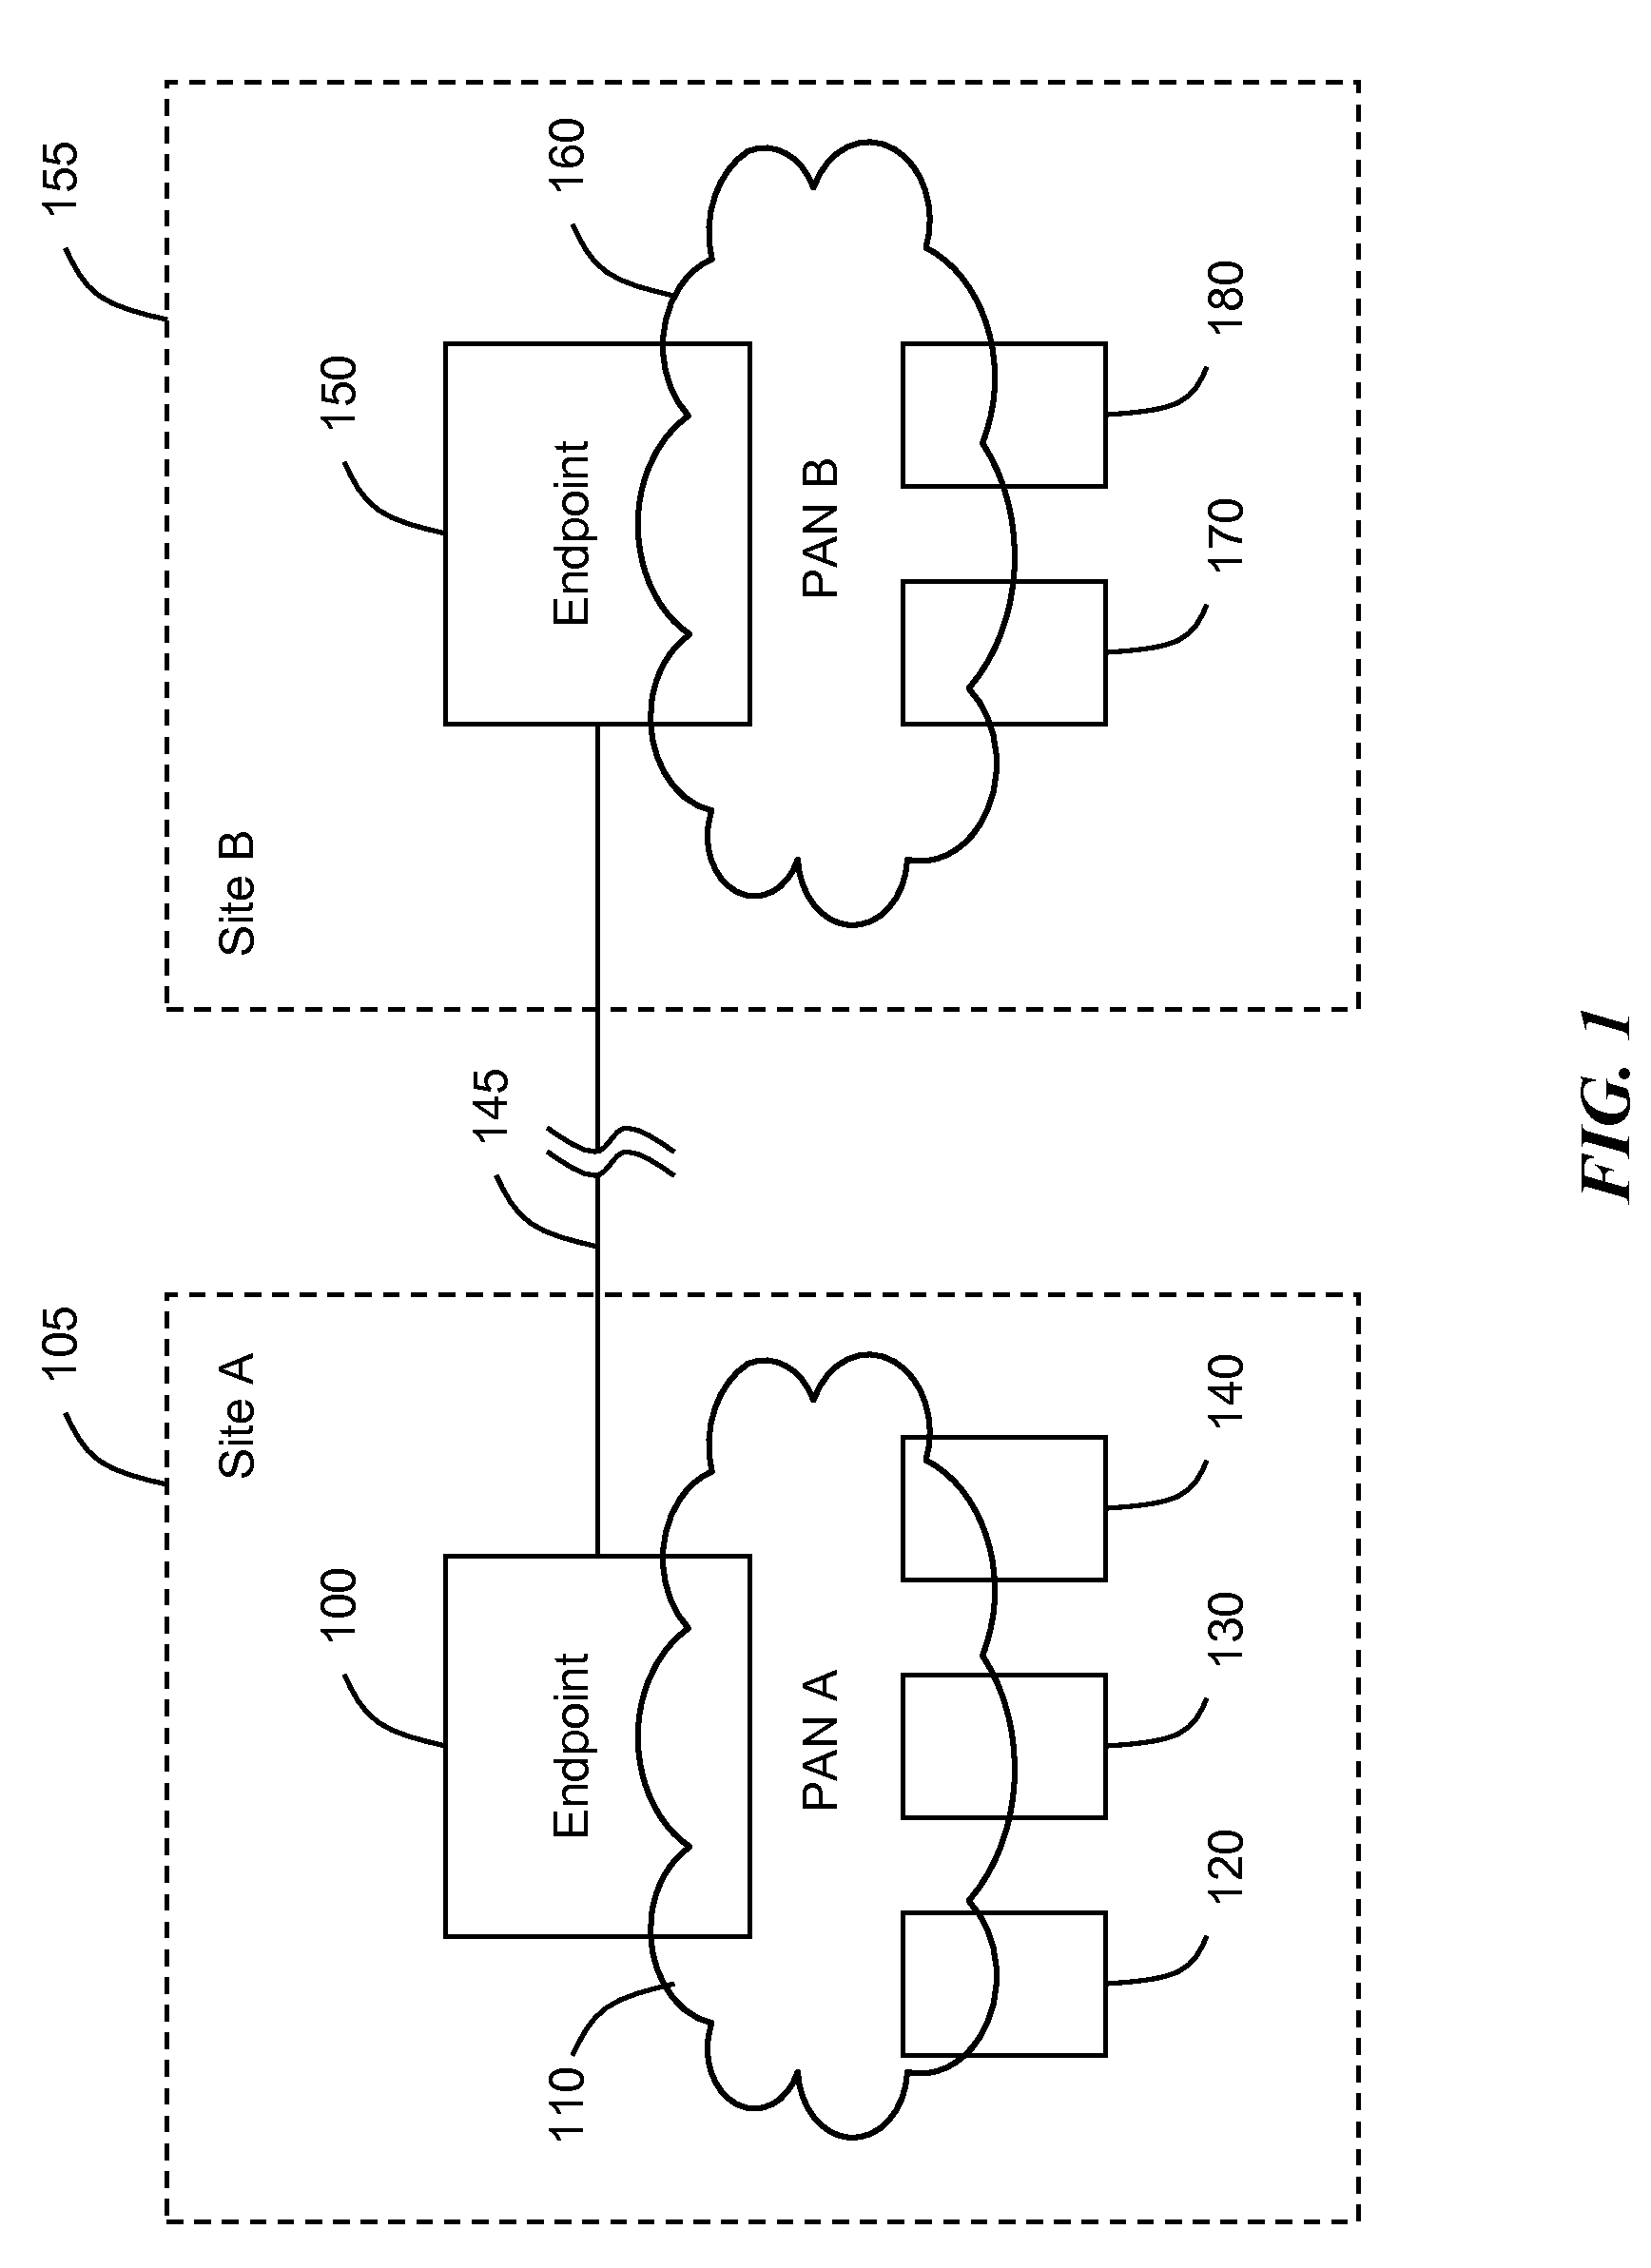 System, method, and apparatus for extending wireless personal area networks using conferencing connection